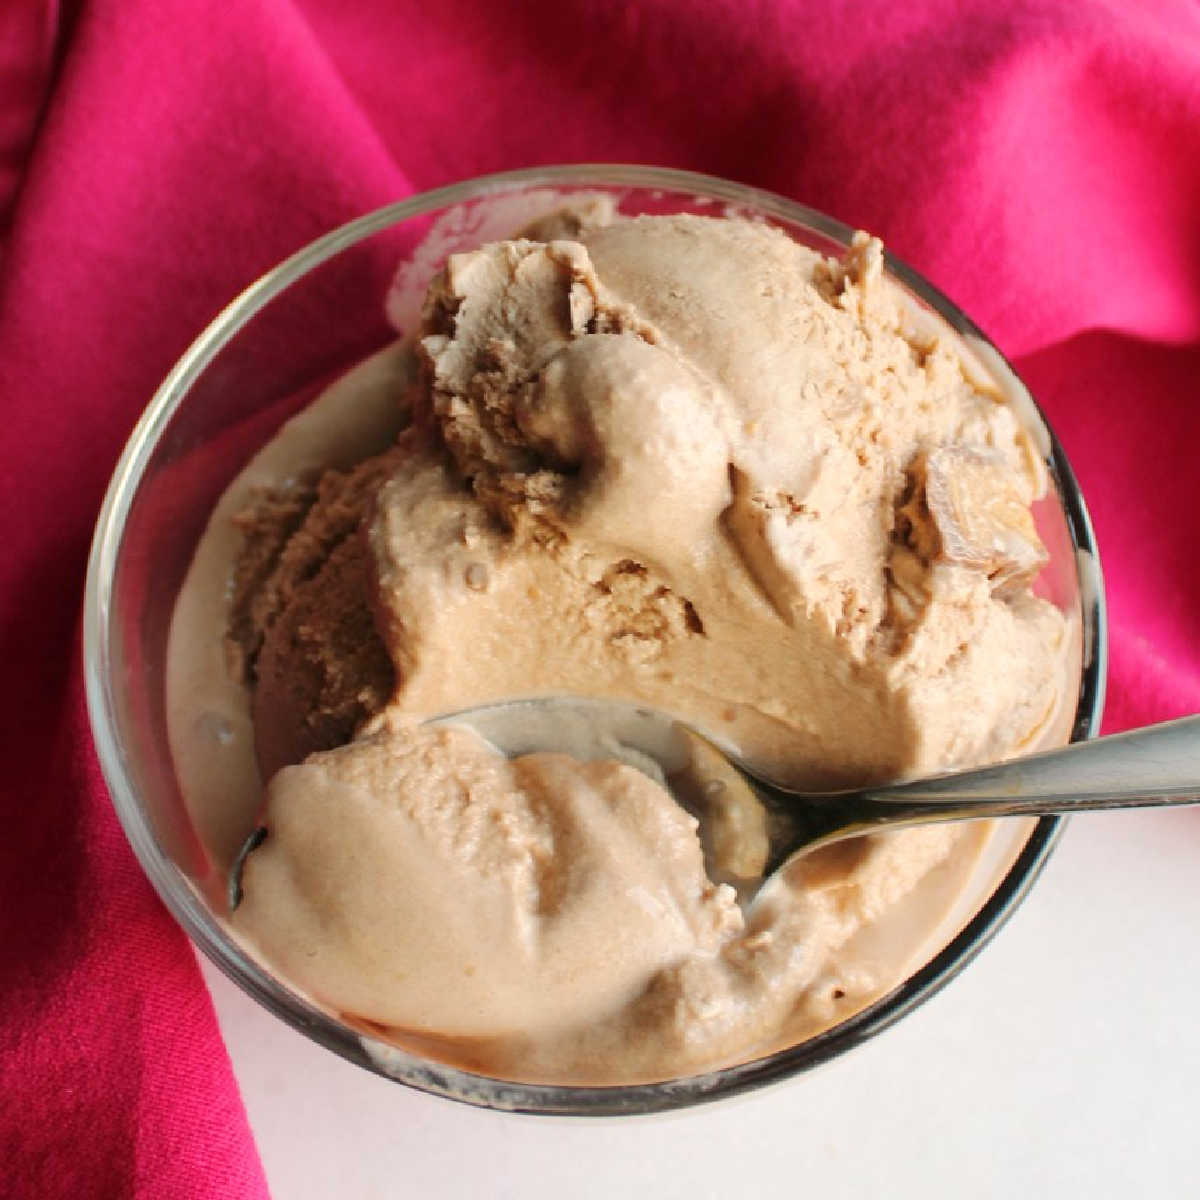 bowl of soft chocolate ice cream with peanut butter chunks.